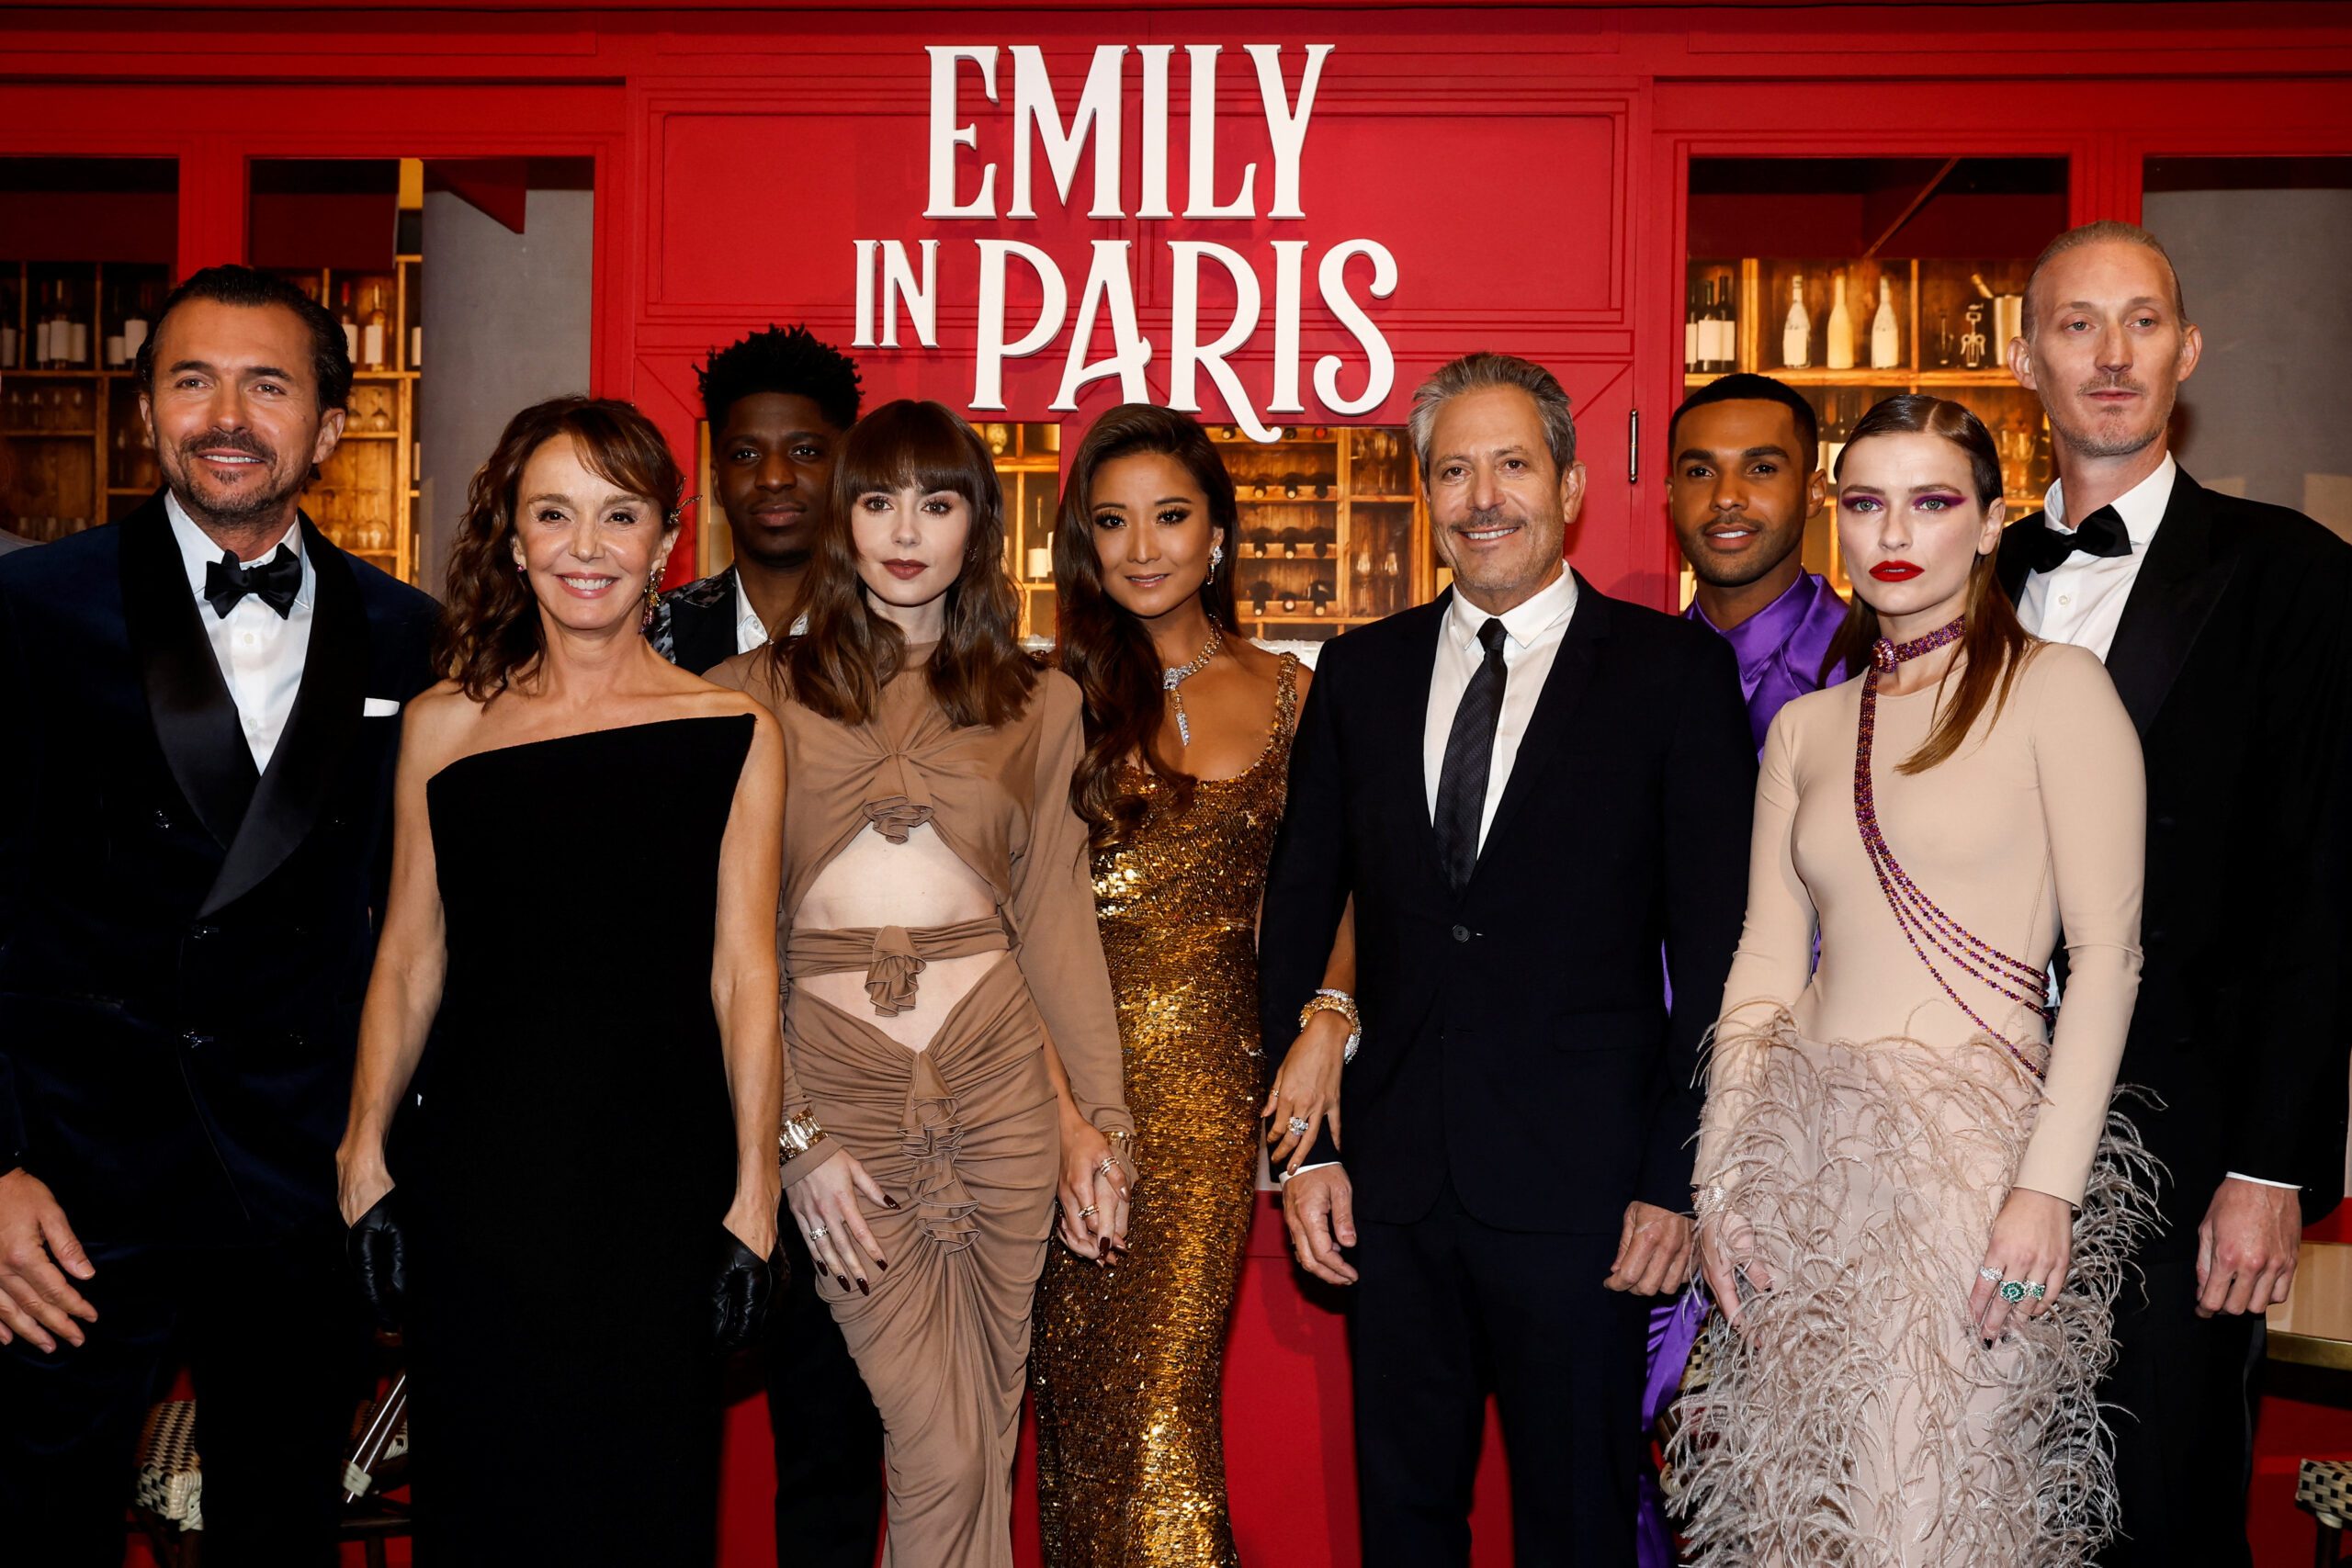 Netflix hit 'Emily in Paris' draws cast to French capital for